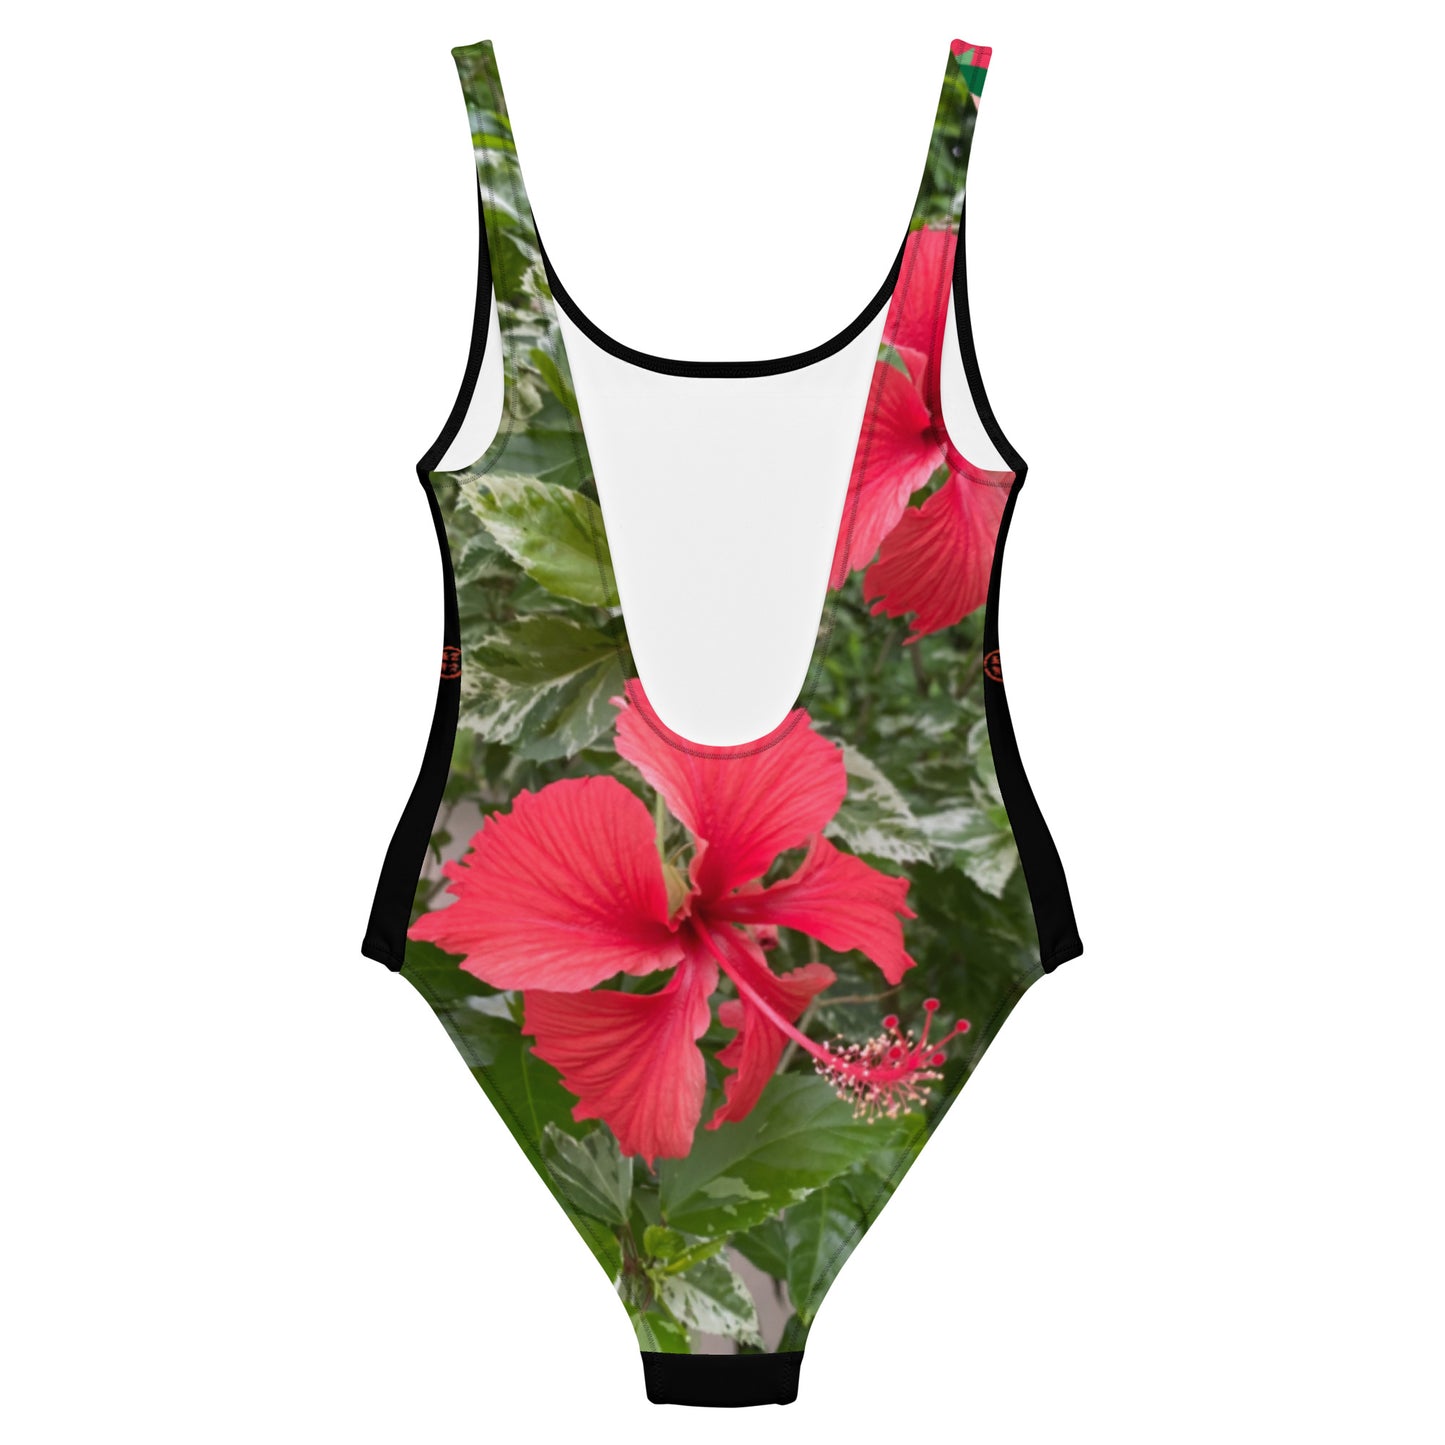 The Hibiscus One Piece Bathing Suit